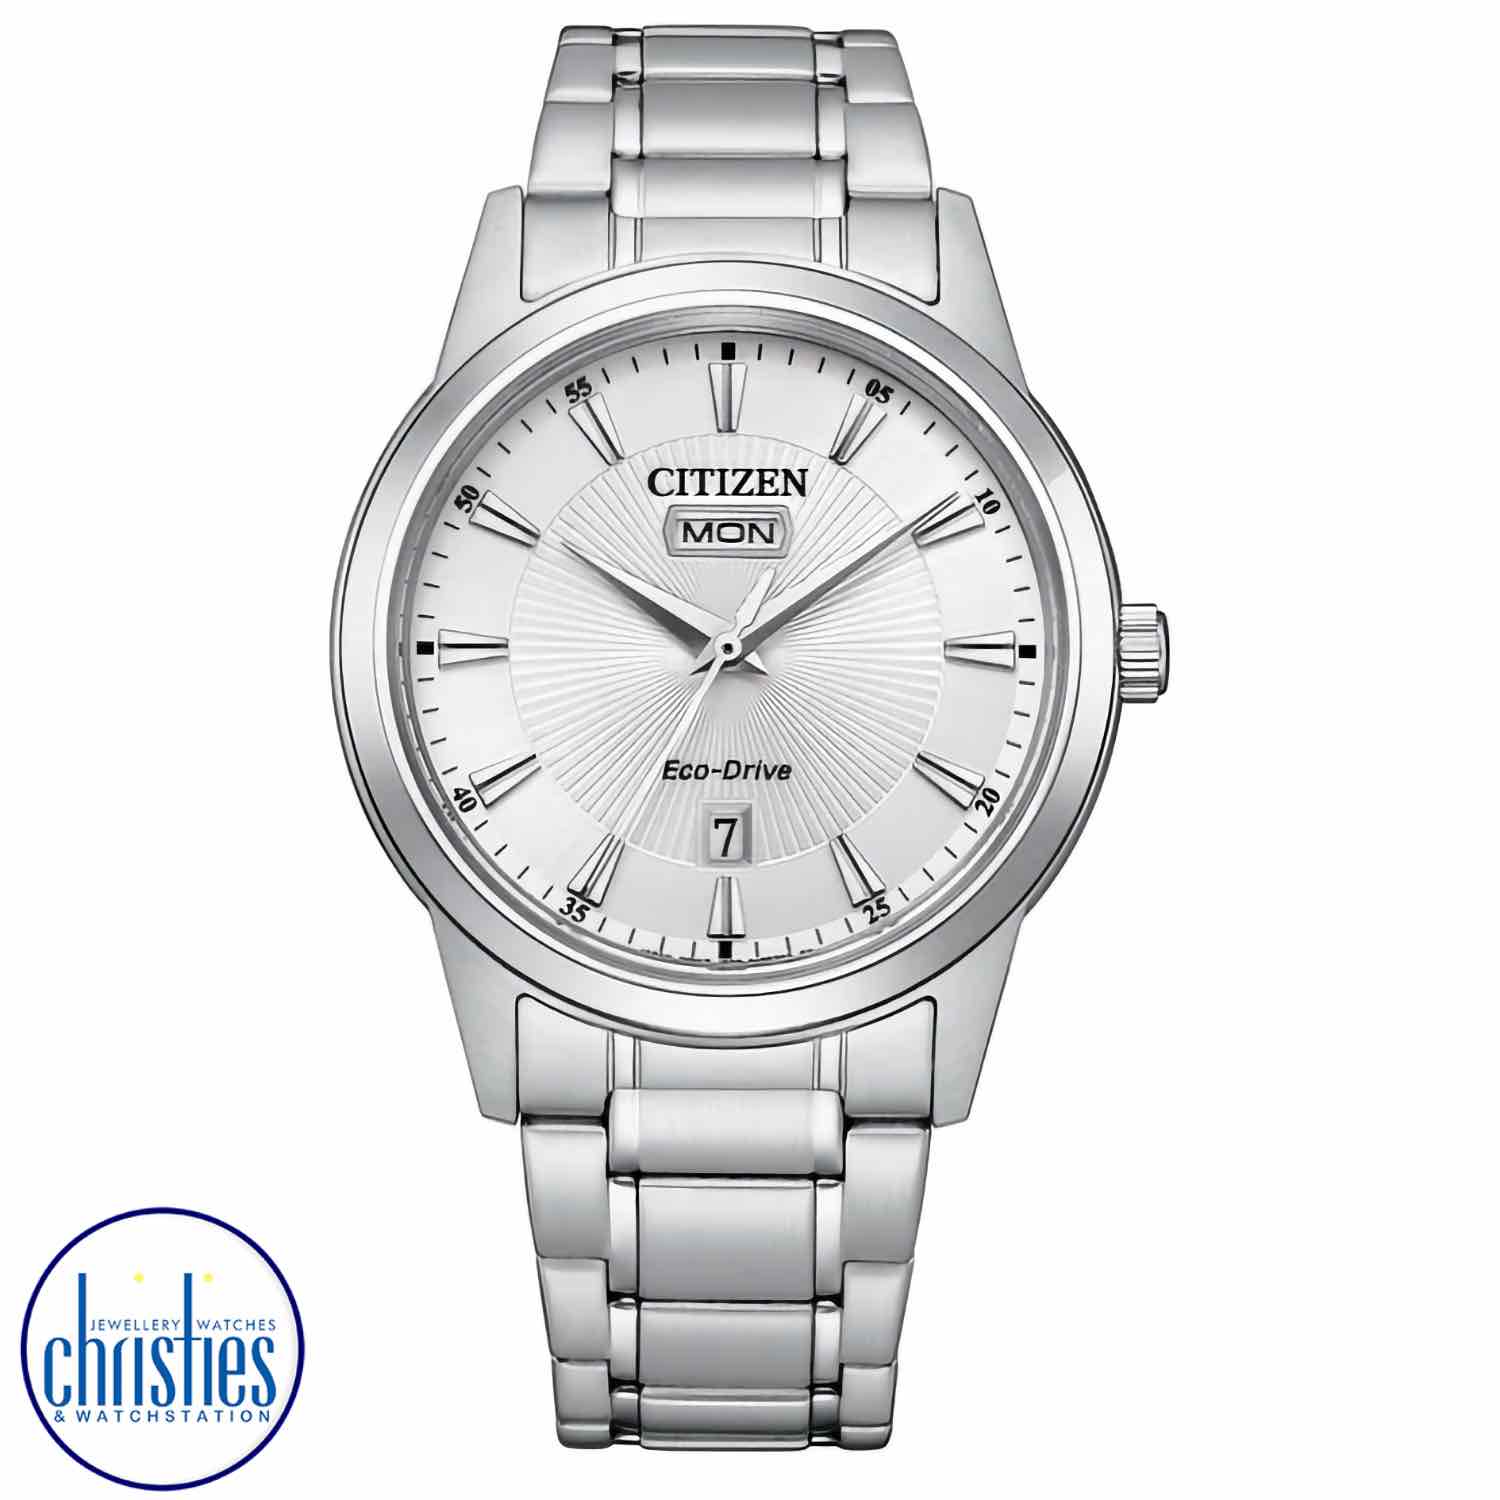 AW0100-86A CITIZEN Eco-Drive Watch. A modern timepiece that displays classic aesthetic appeal.